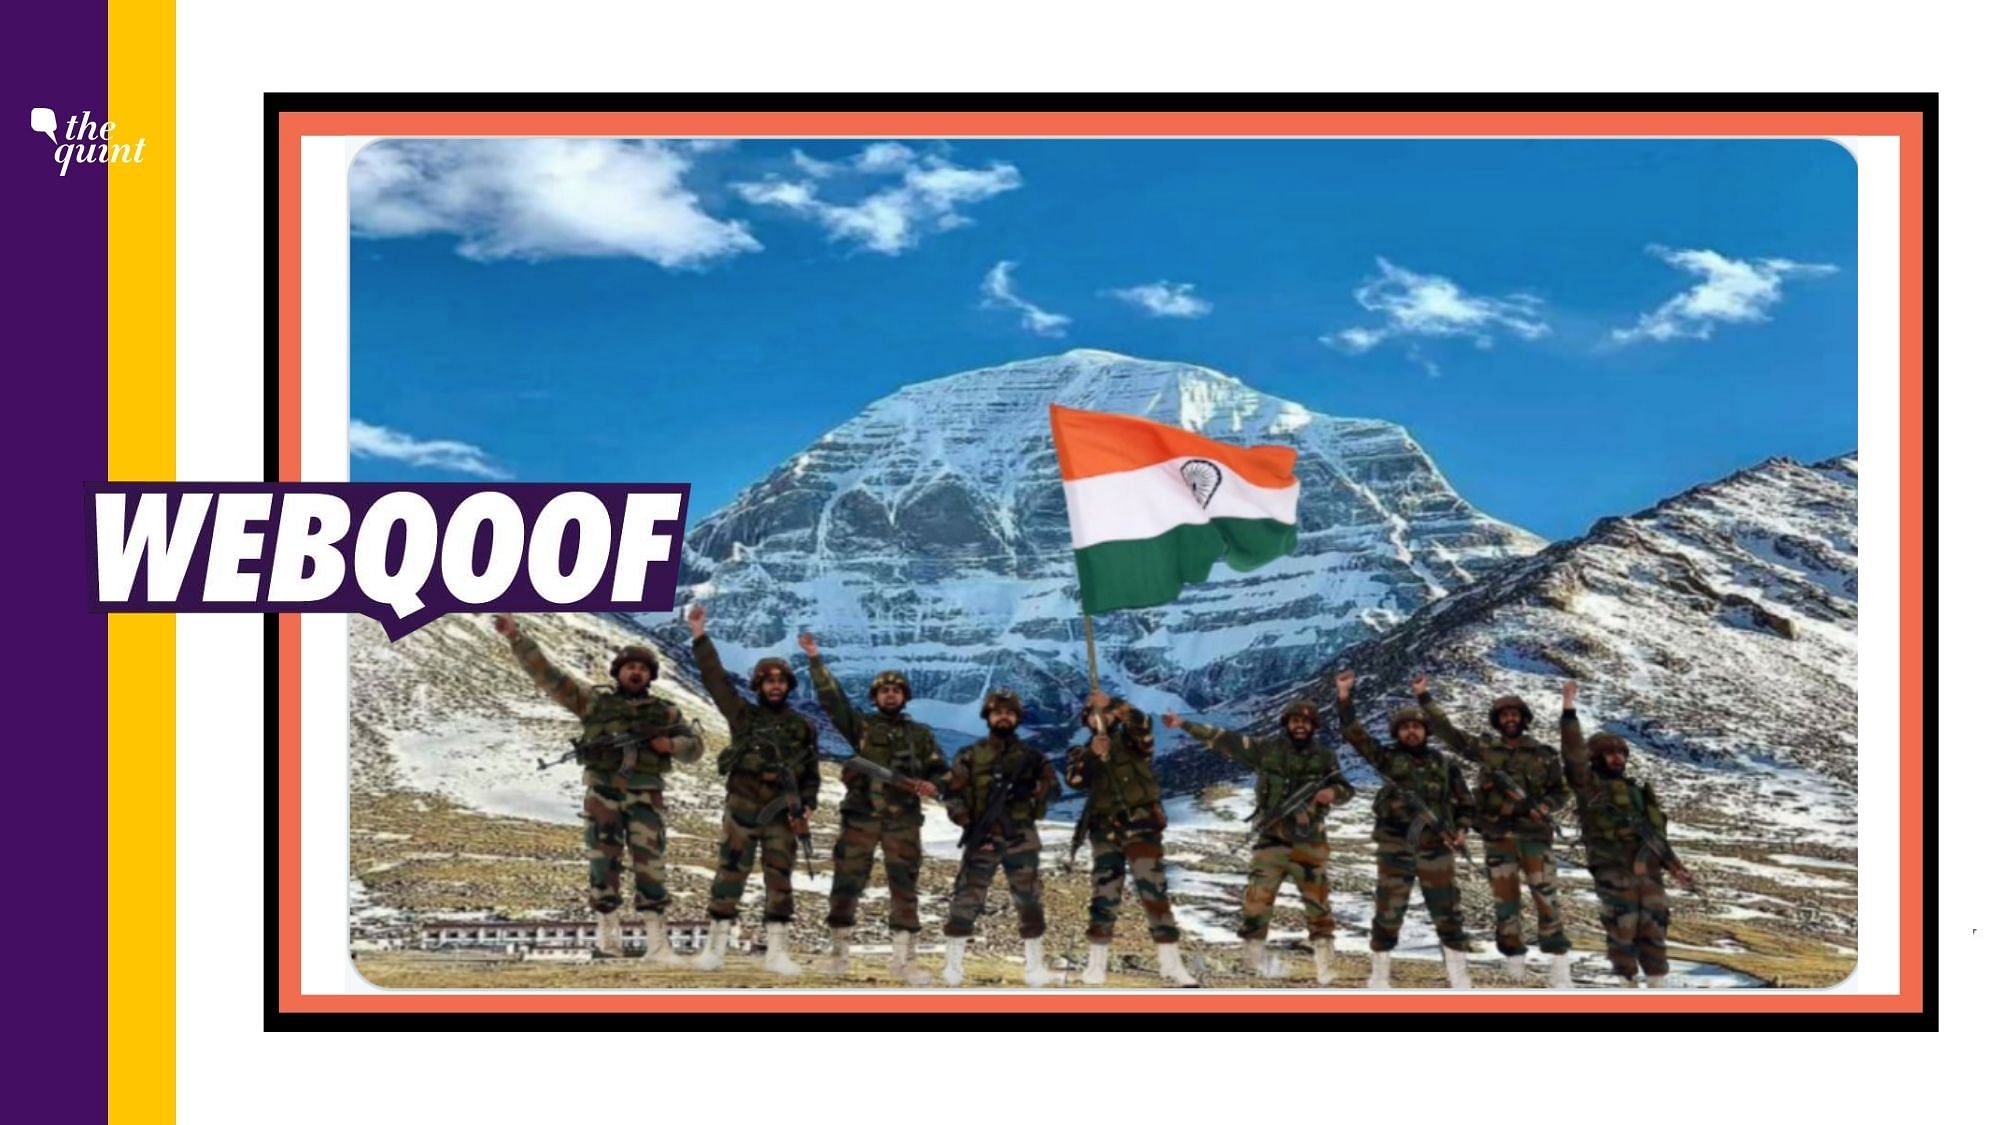 The photograph has been morphed on the background of Mansarovar and it actually shows soldiers of the Indian Army waving the tricolour at the Line of Control (L